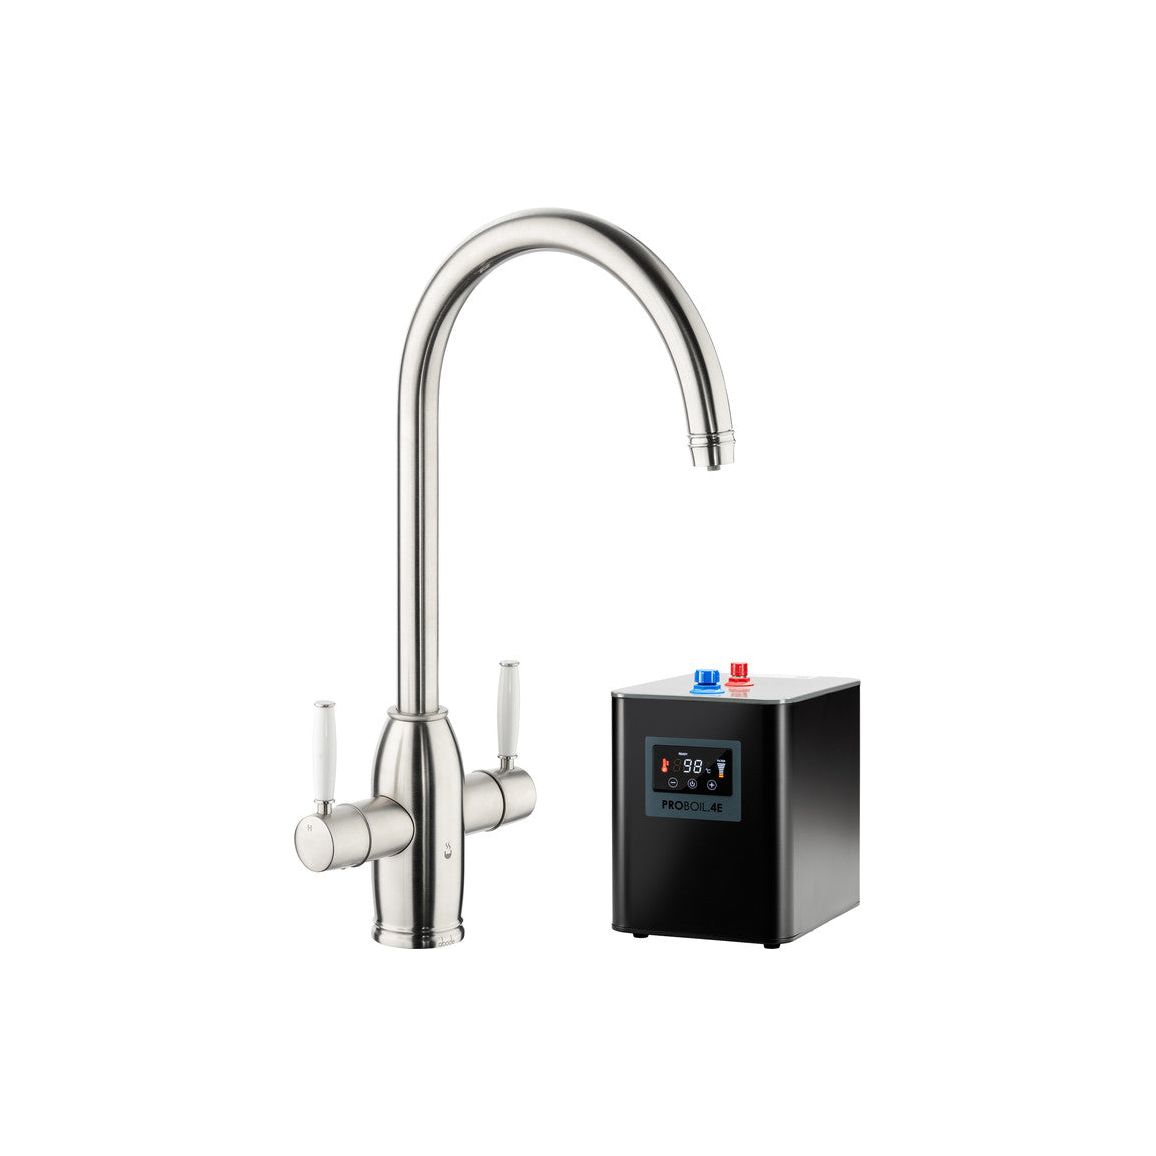 Abode Province 4 IN 1 Monobloc Tap & Proboil.4E Tank - Brushed Nickel